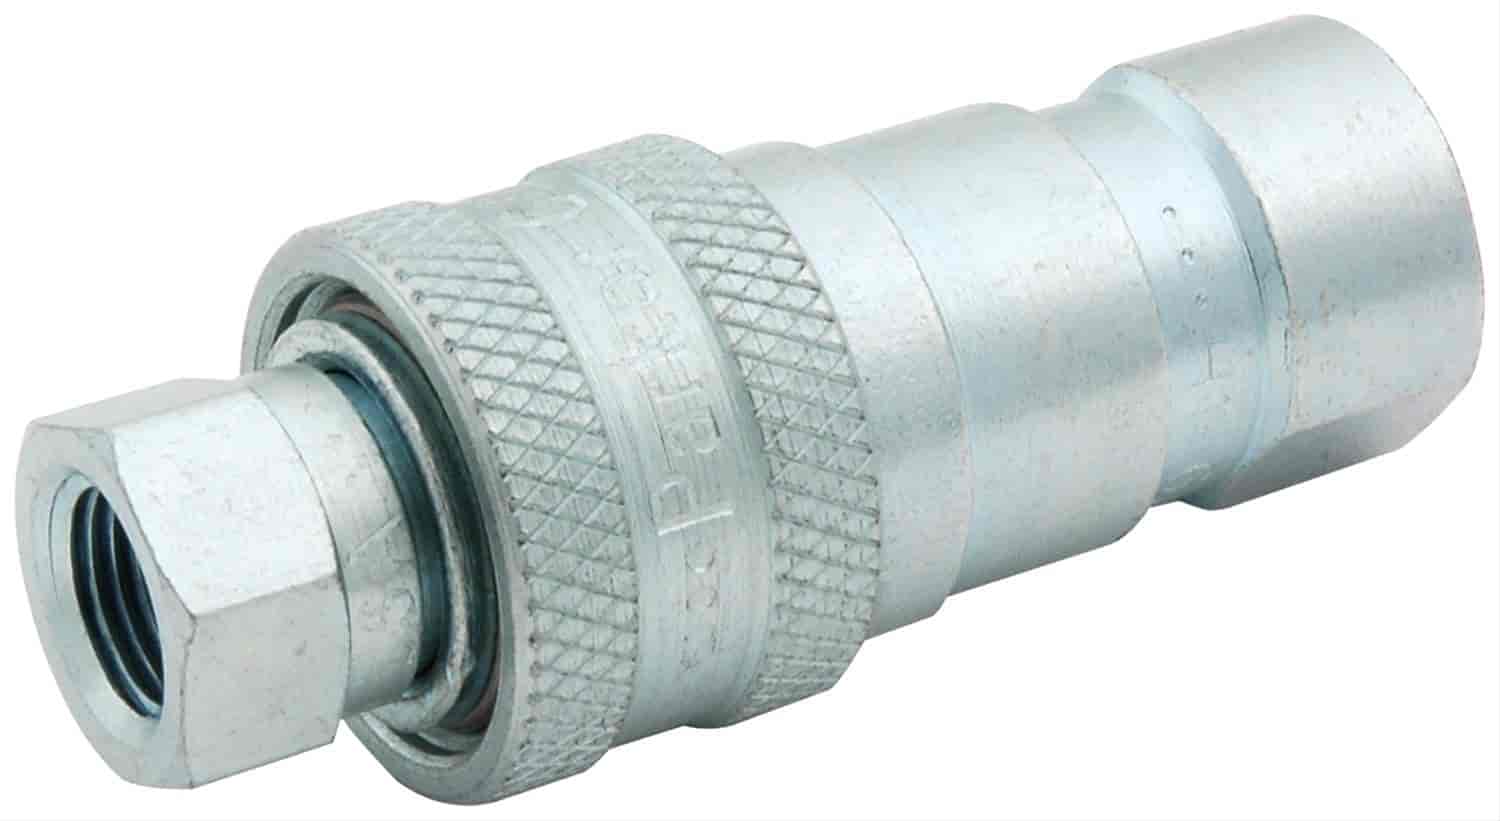 Steel Quick Disconnect Coupling Kit 1/8" NPT Female